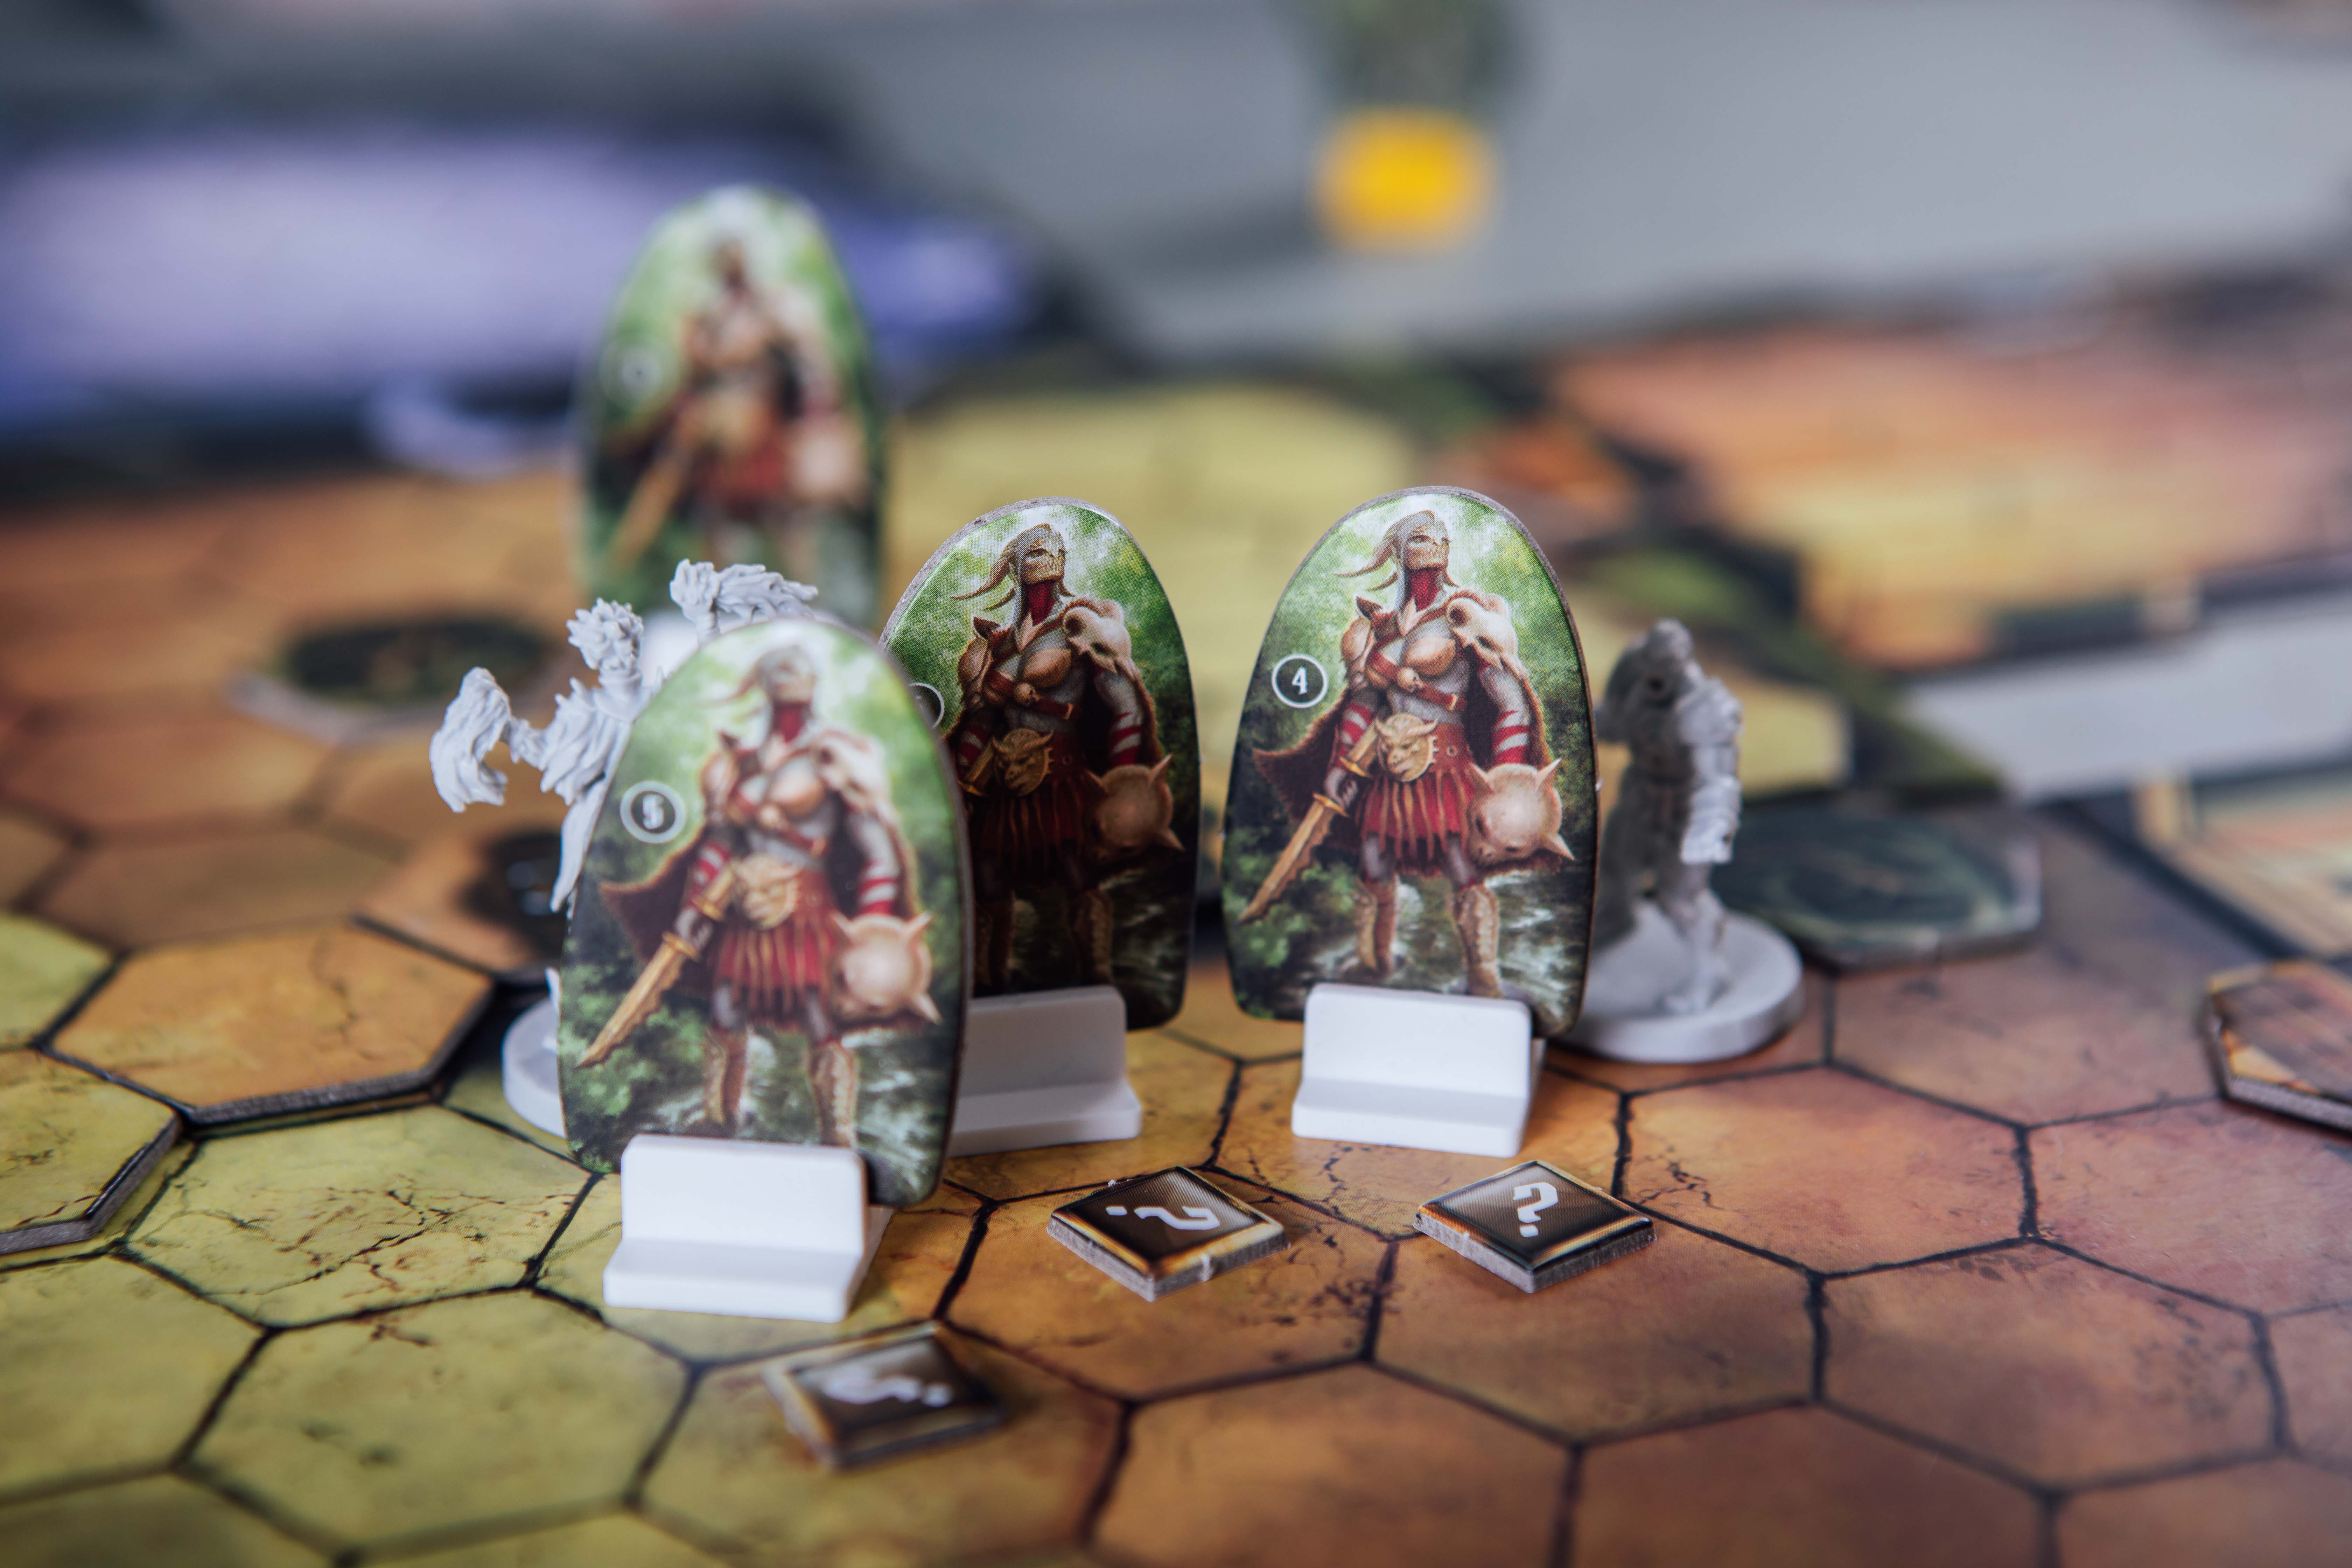 Gloomhaven Inox Encampment getting into a fight